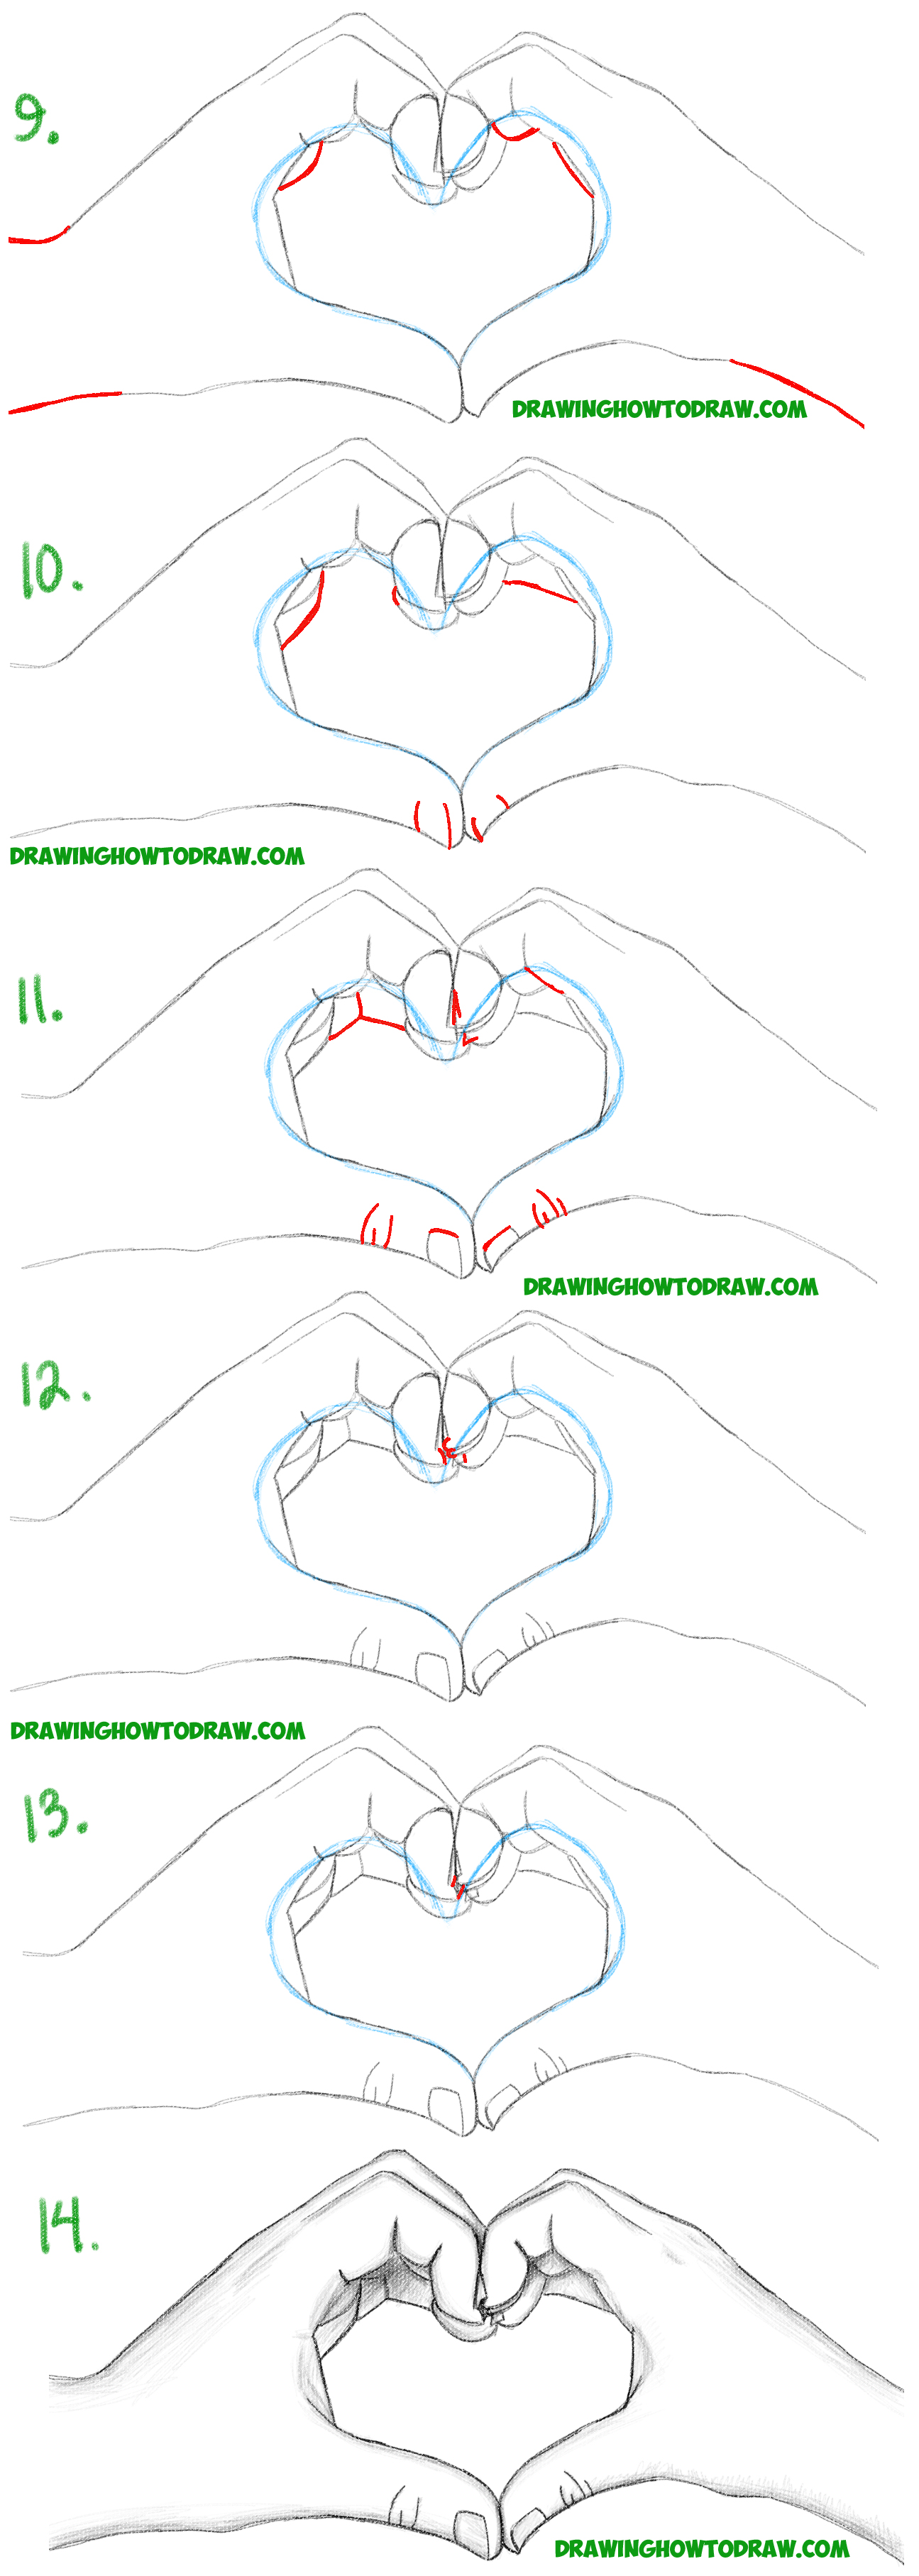 How to Draw Heart Hands in Easy to Follow Step by Step ...